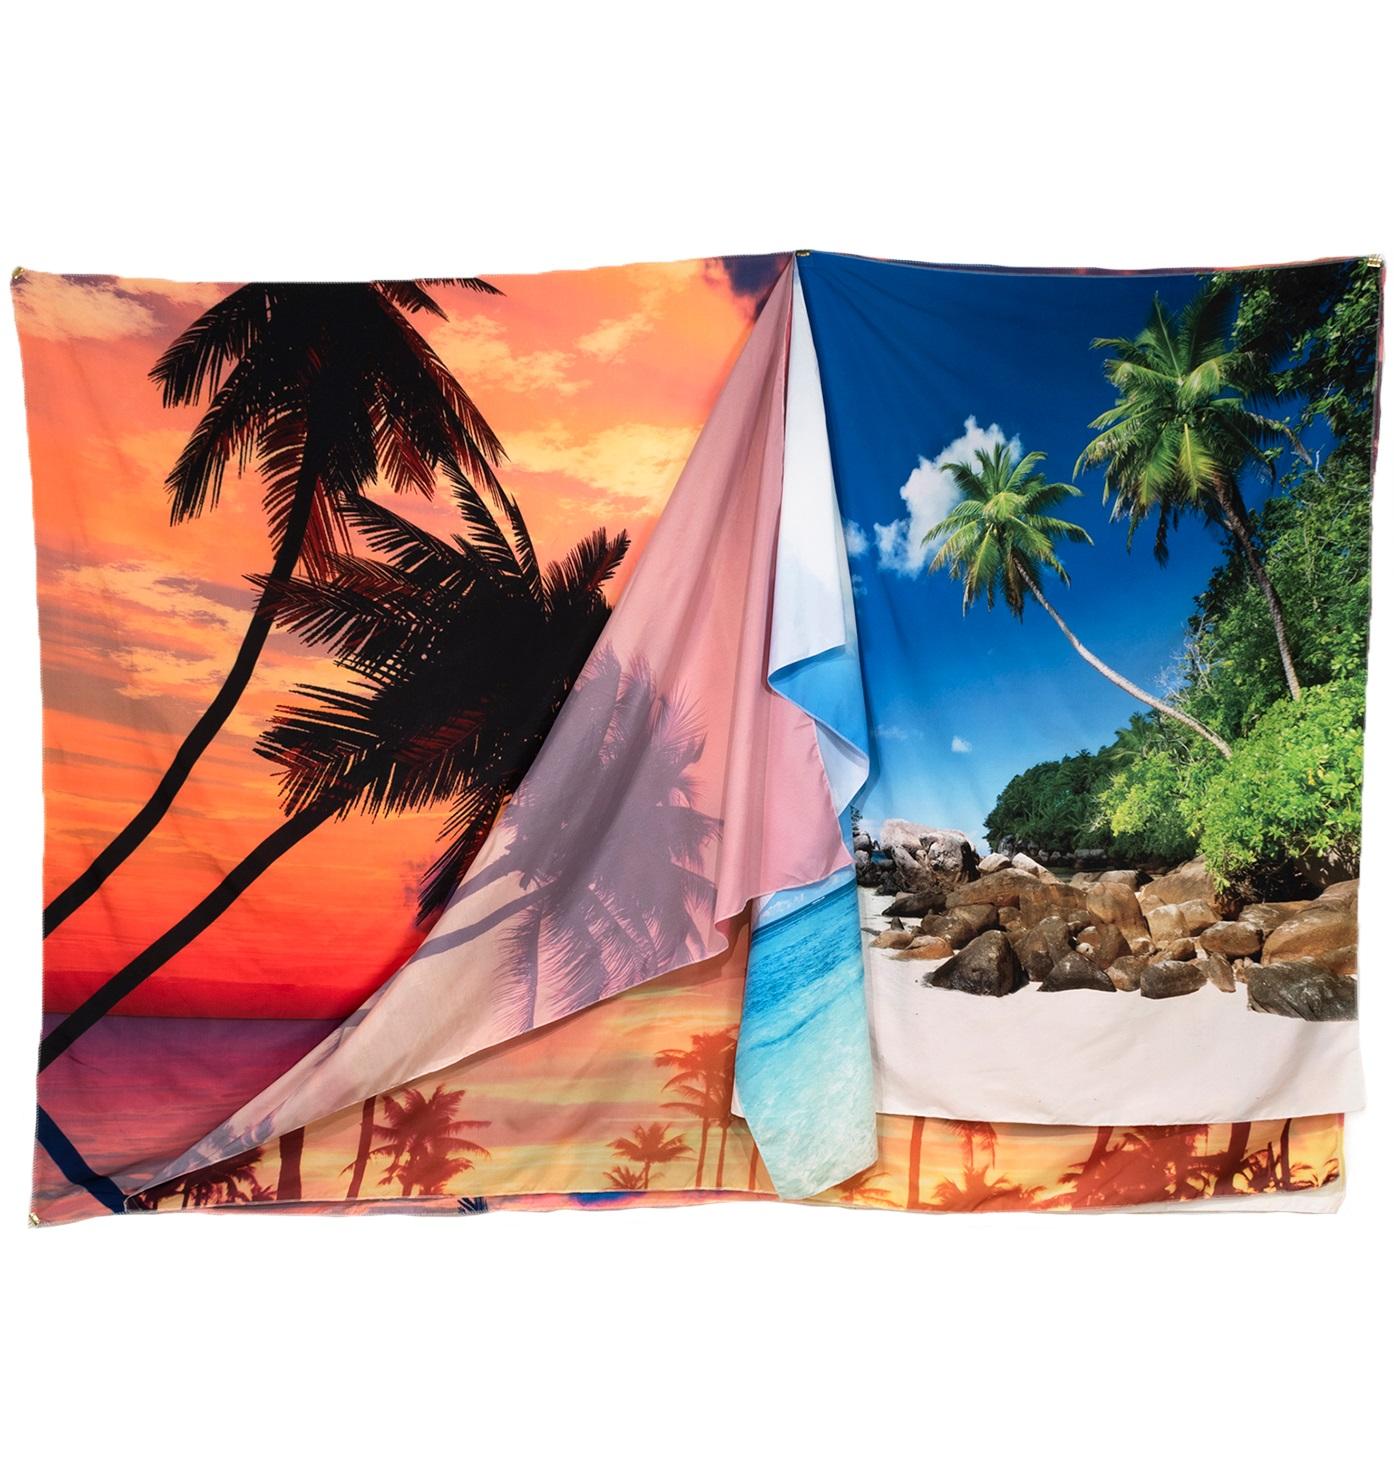 AS FAR AS A VIEW - Folded Tapestry Collage of Scenic Landscapes w/ Palm Trees